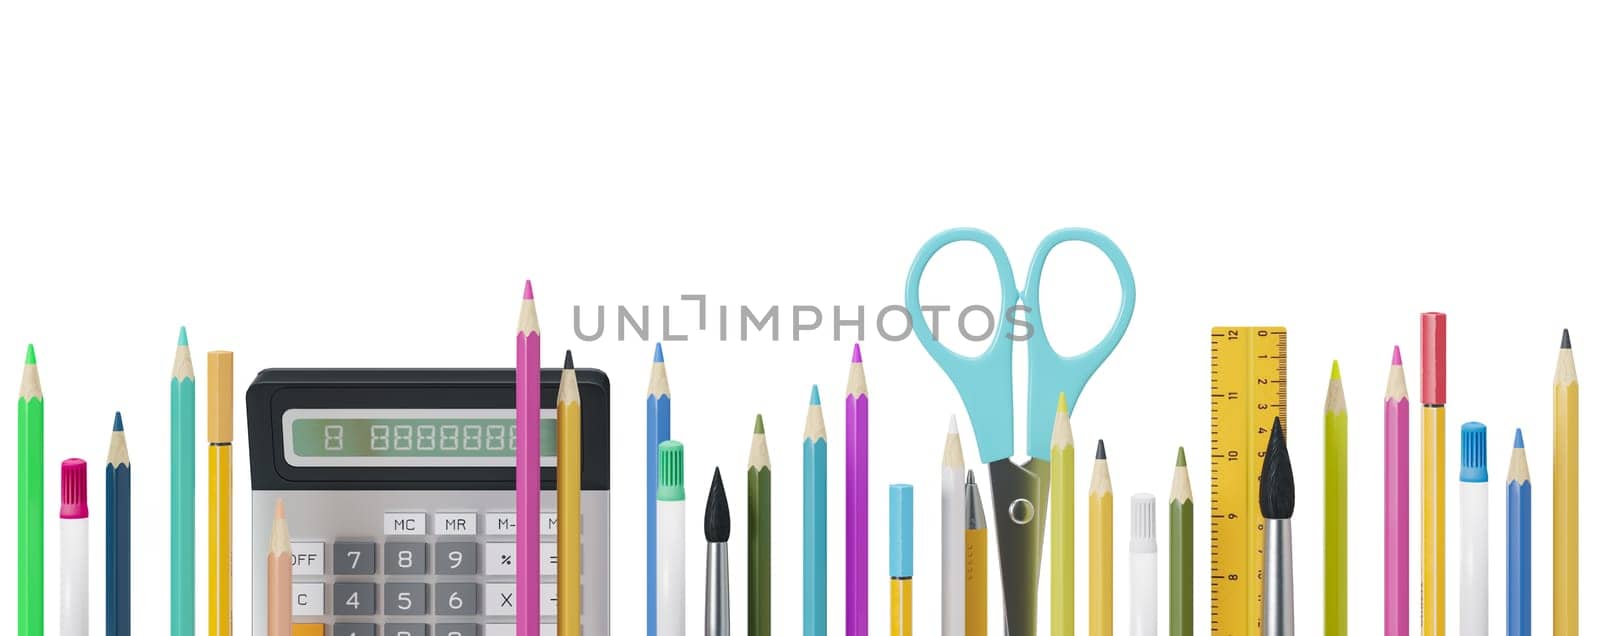 Colorful school stationery, supplies isolated on white background. Bottom border. Applicable for posters, announcements advertising. Education, daycare, preschool. Back to school shopping, sale. 3D